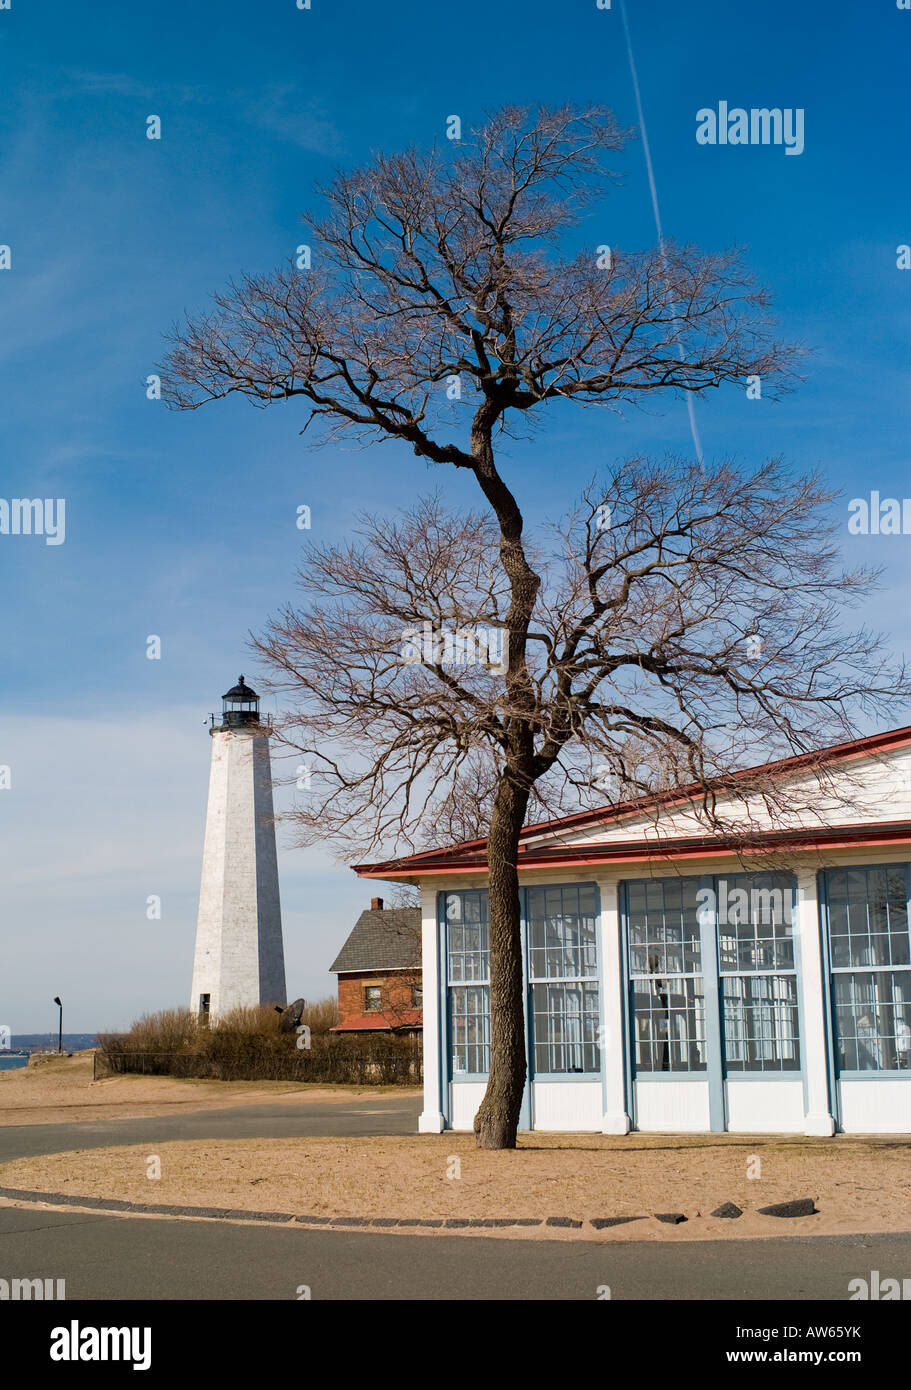 The Lighthouse and carousel building with tree at Lighthouse Point Park in New Haven, Connecticut USA. Very High Resolution. Stock Photo